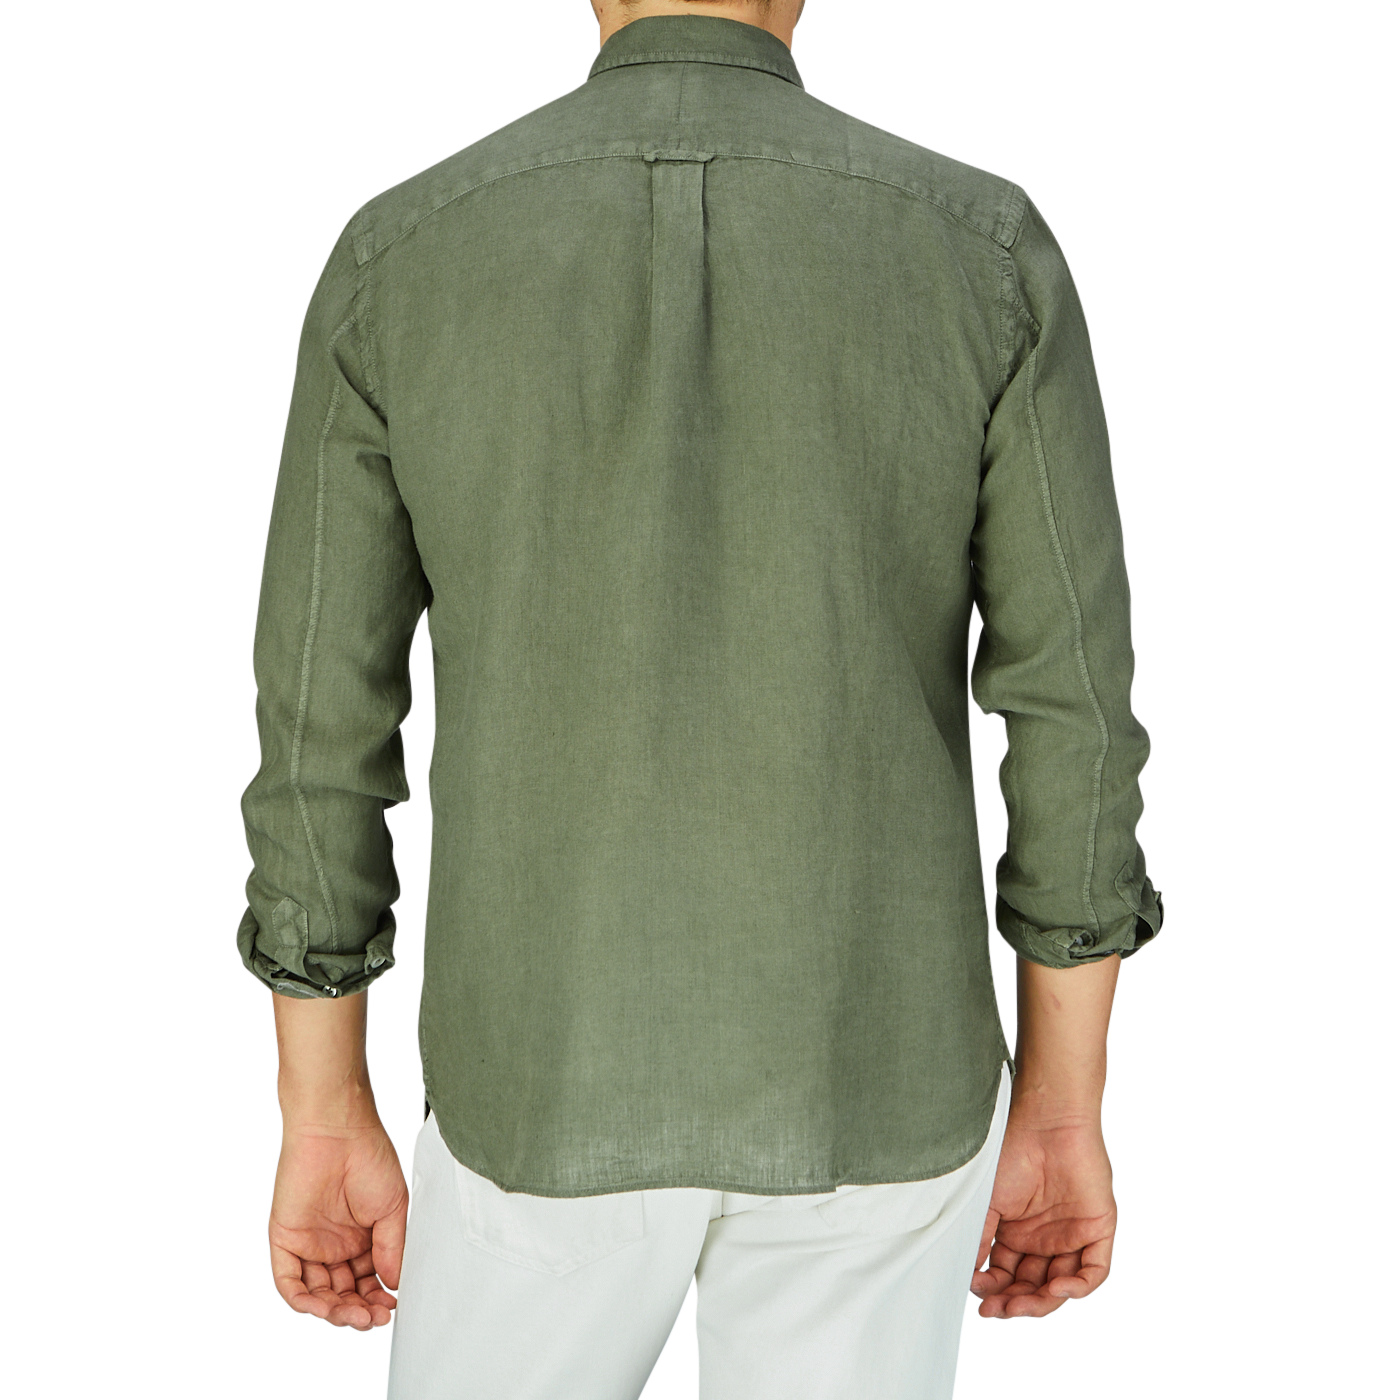 A person standing with their back to the camera, wearing an Xacus Olive Green Washed Linen Legacy Shirt with a cut-away collar and white pants.